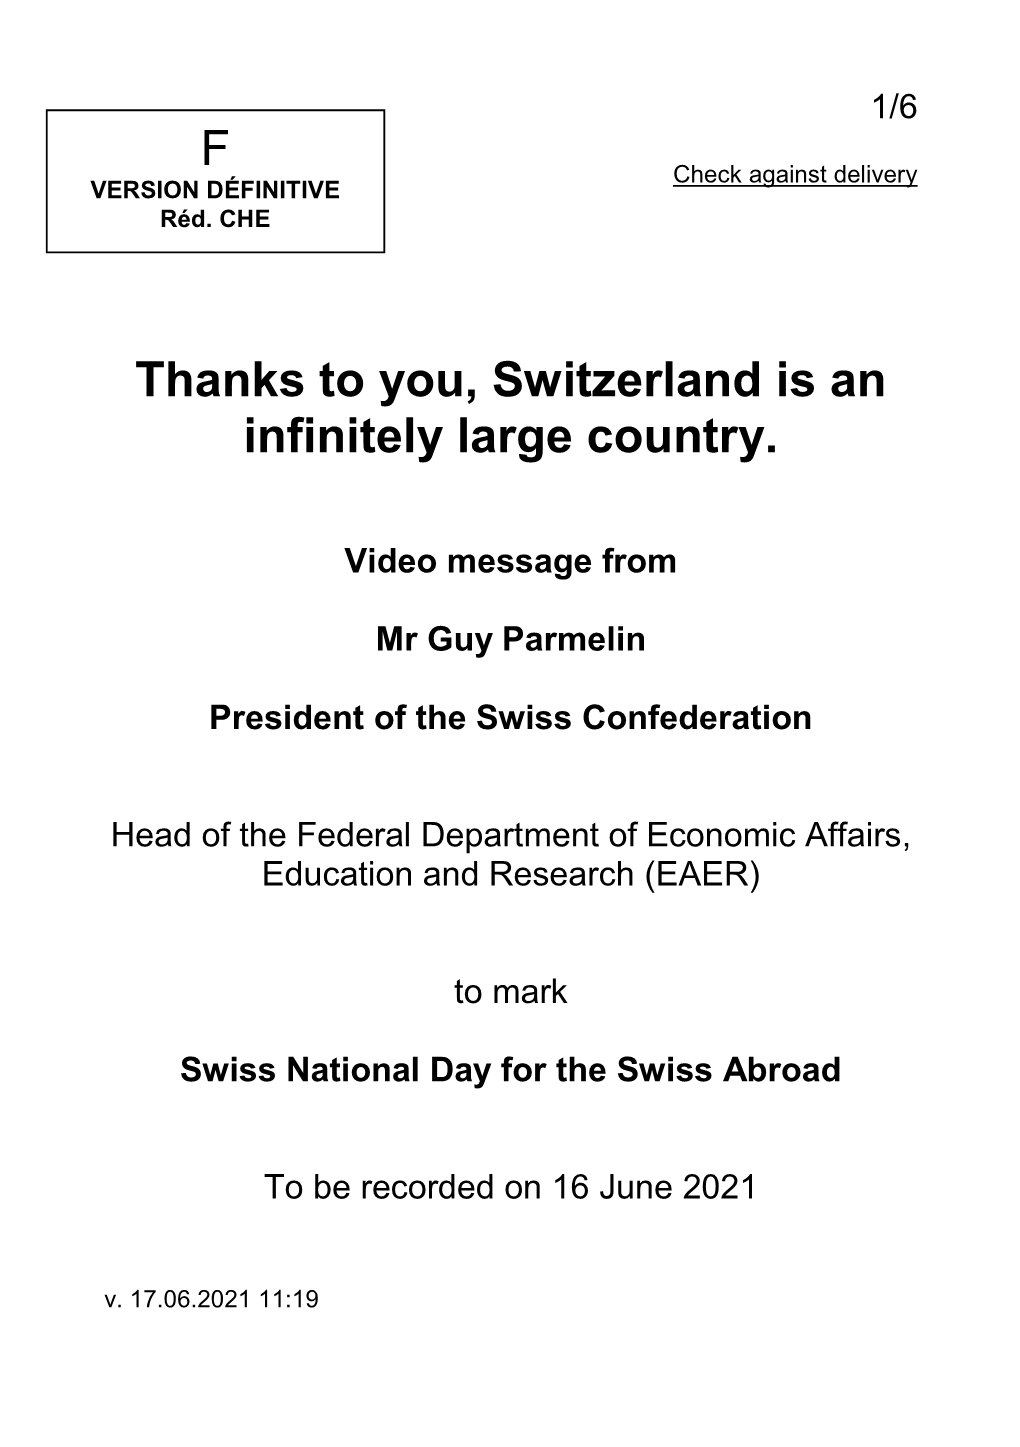 Address by President of the Swiss Confederation Guy Parmelin on 1